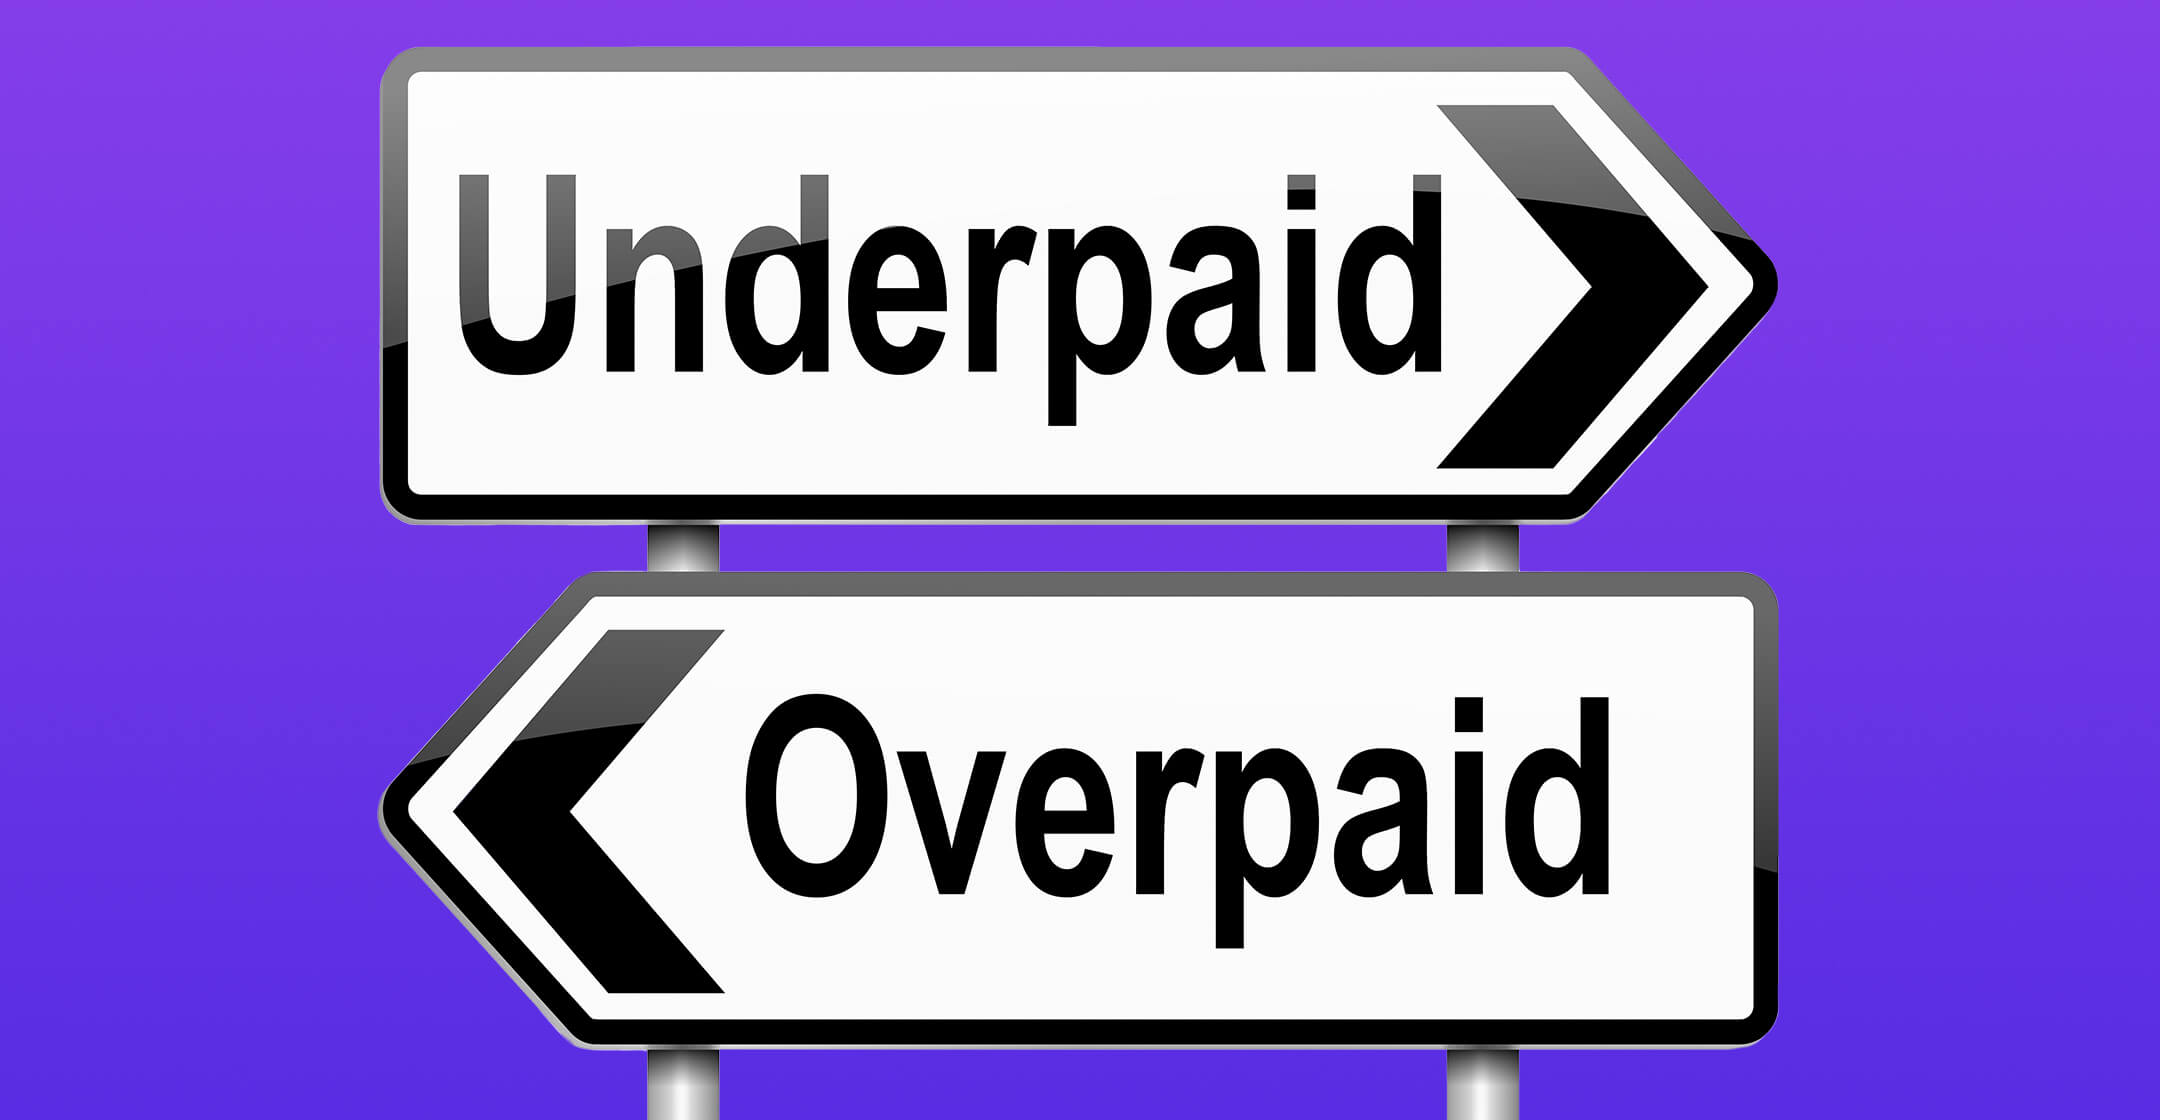 Are Accountants Underpaid?